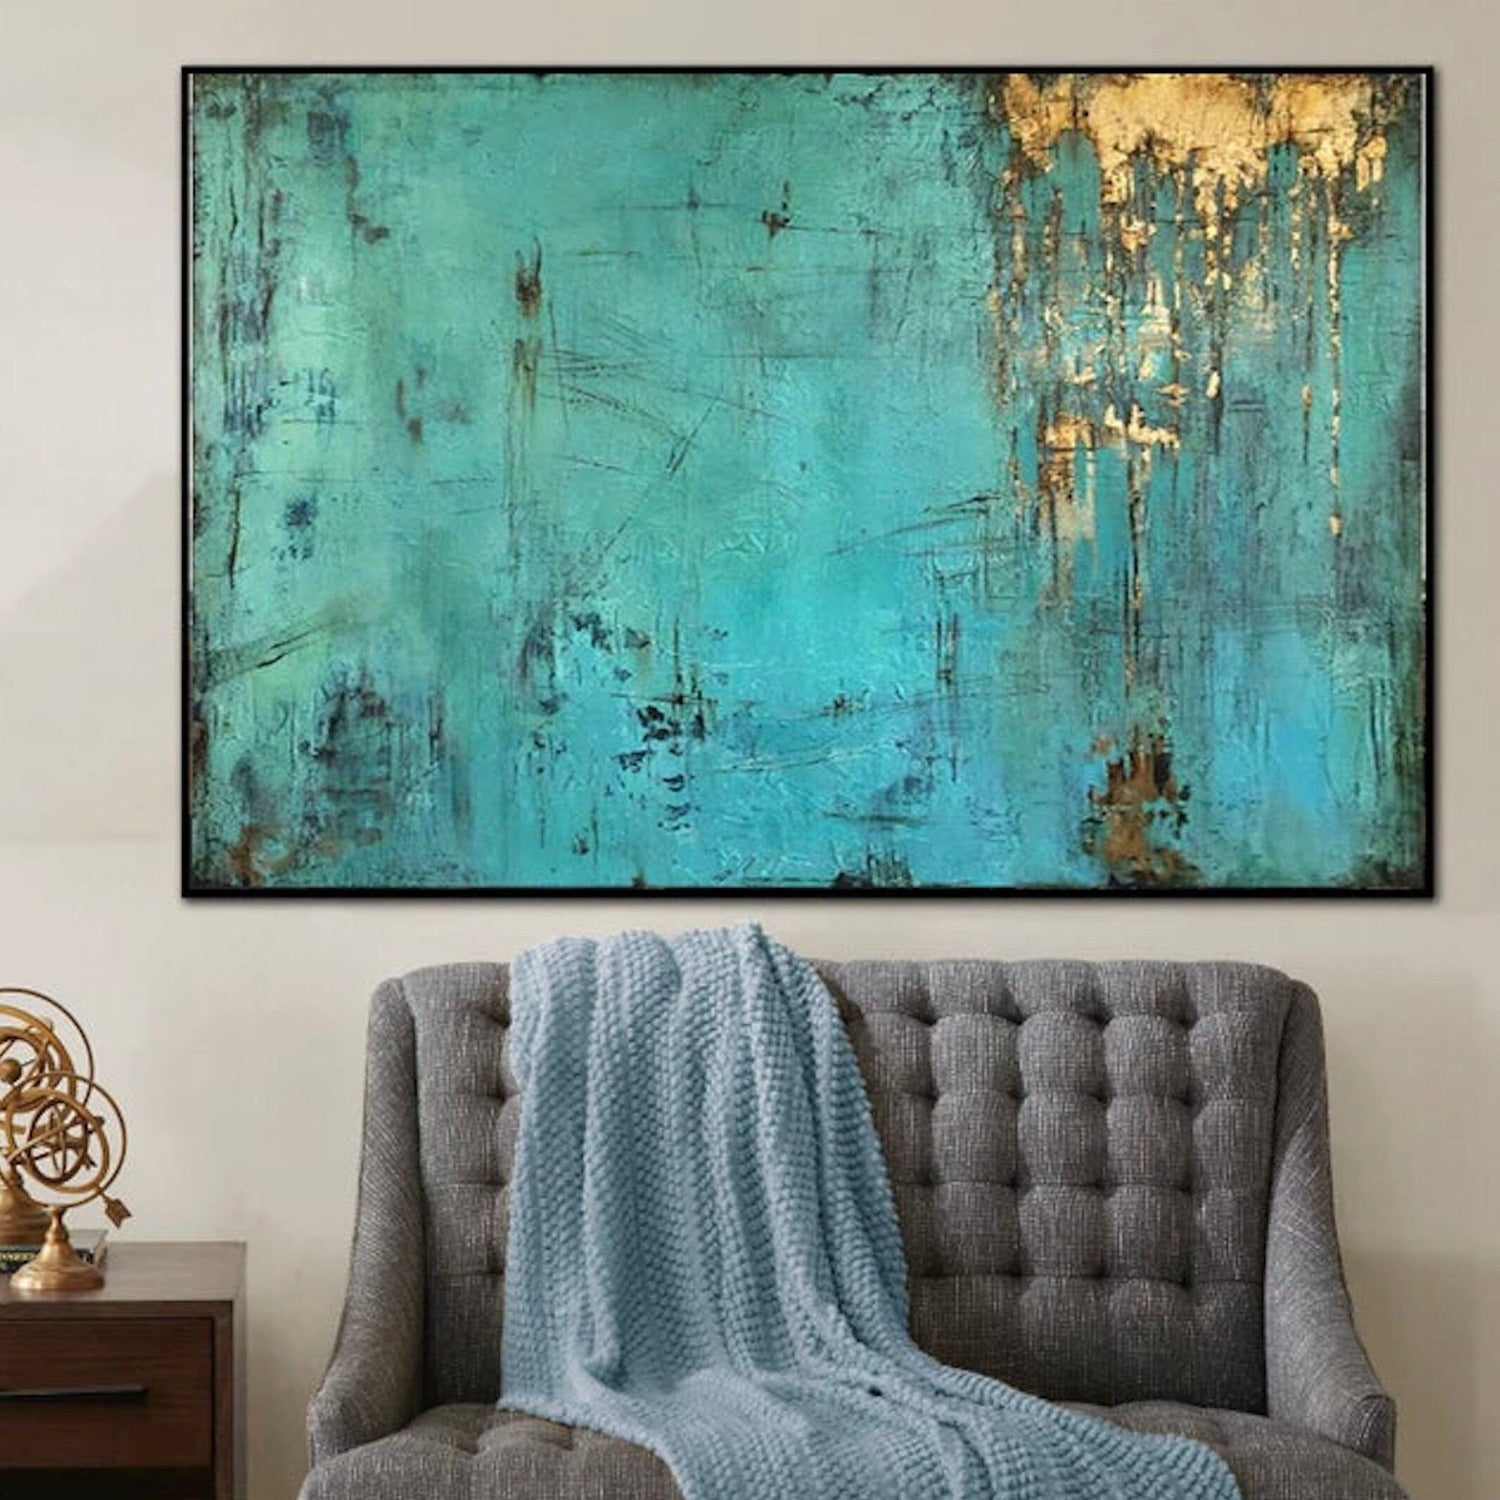  Large Hand Painted Textured 3D Oil Painting on Canvas Big  Abstract Wall Art Landscape Artwork: Paintings